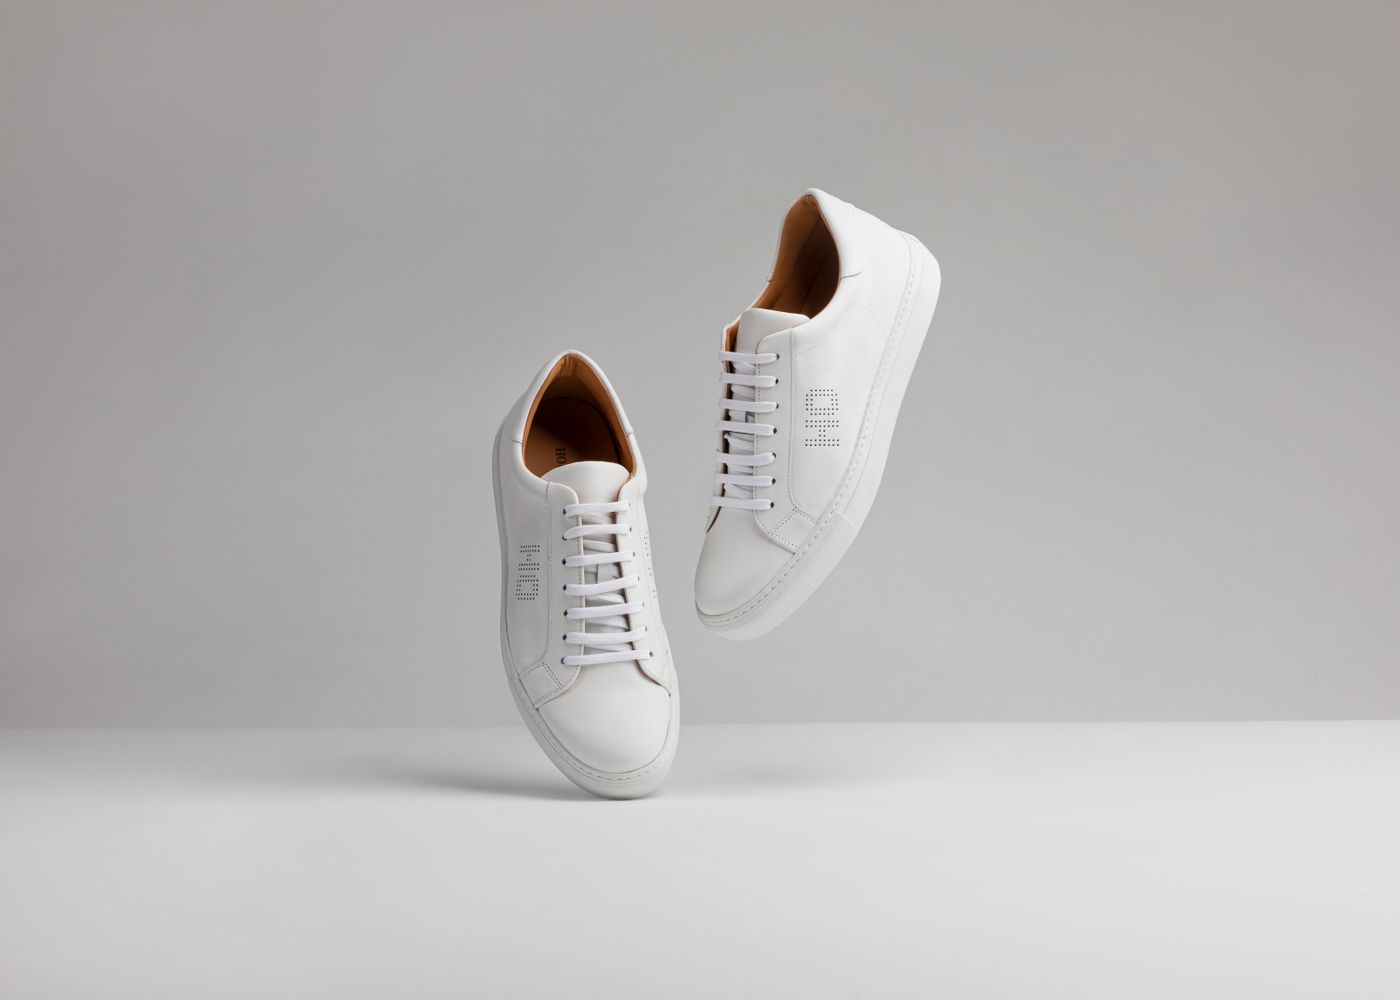 Business casual white sneakers